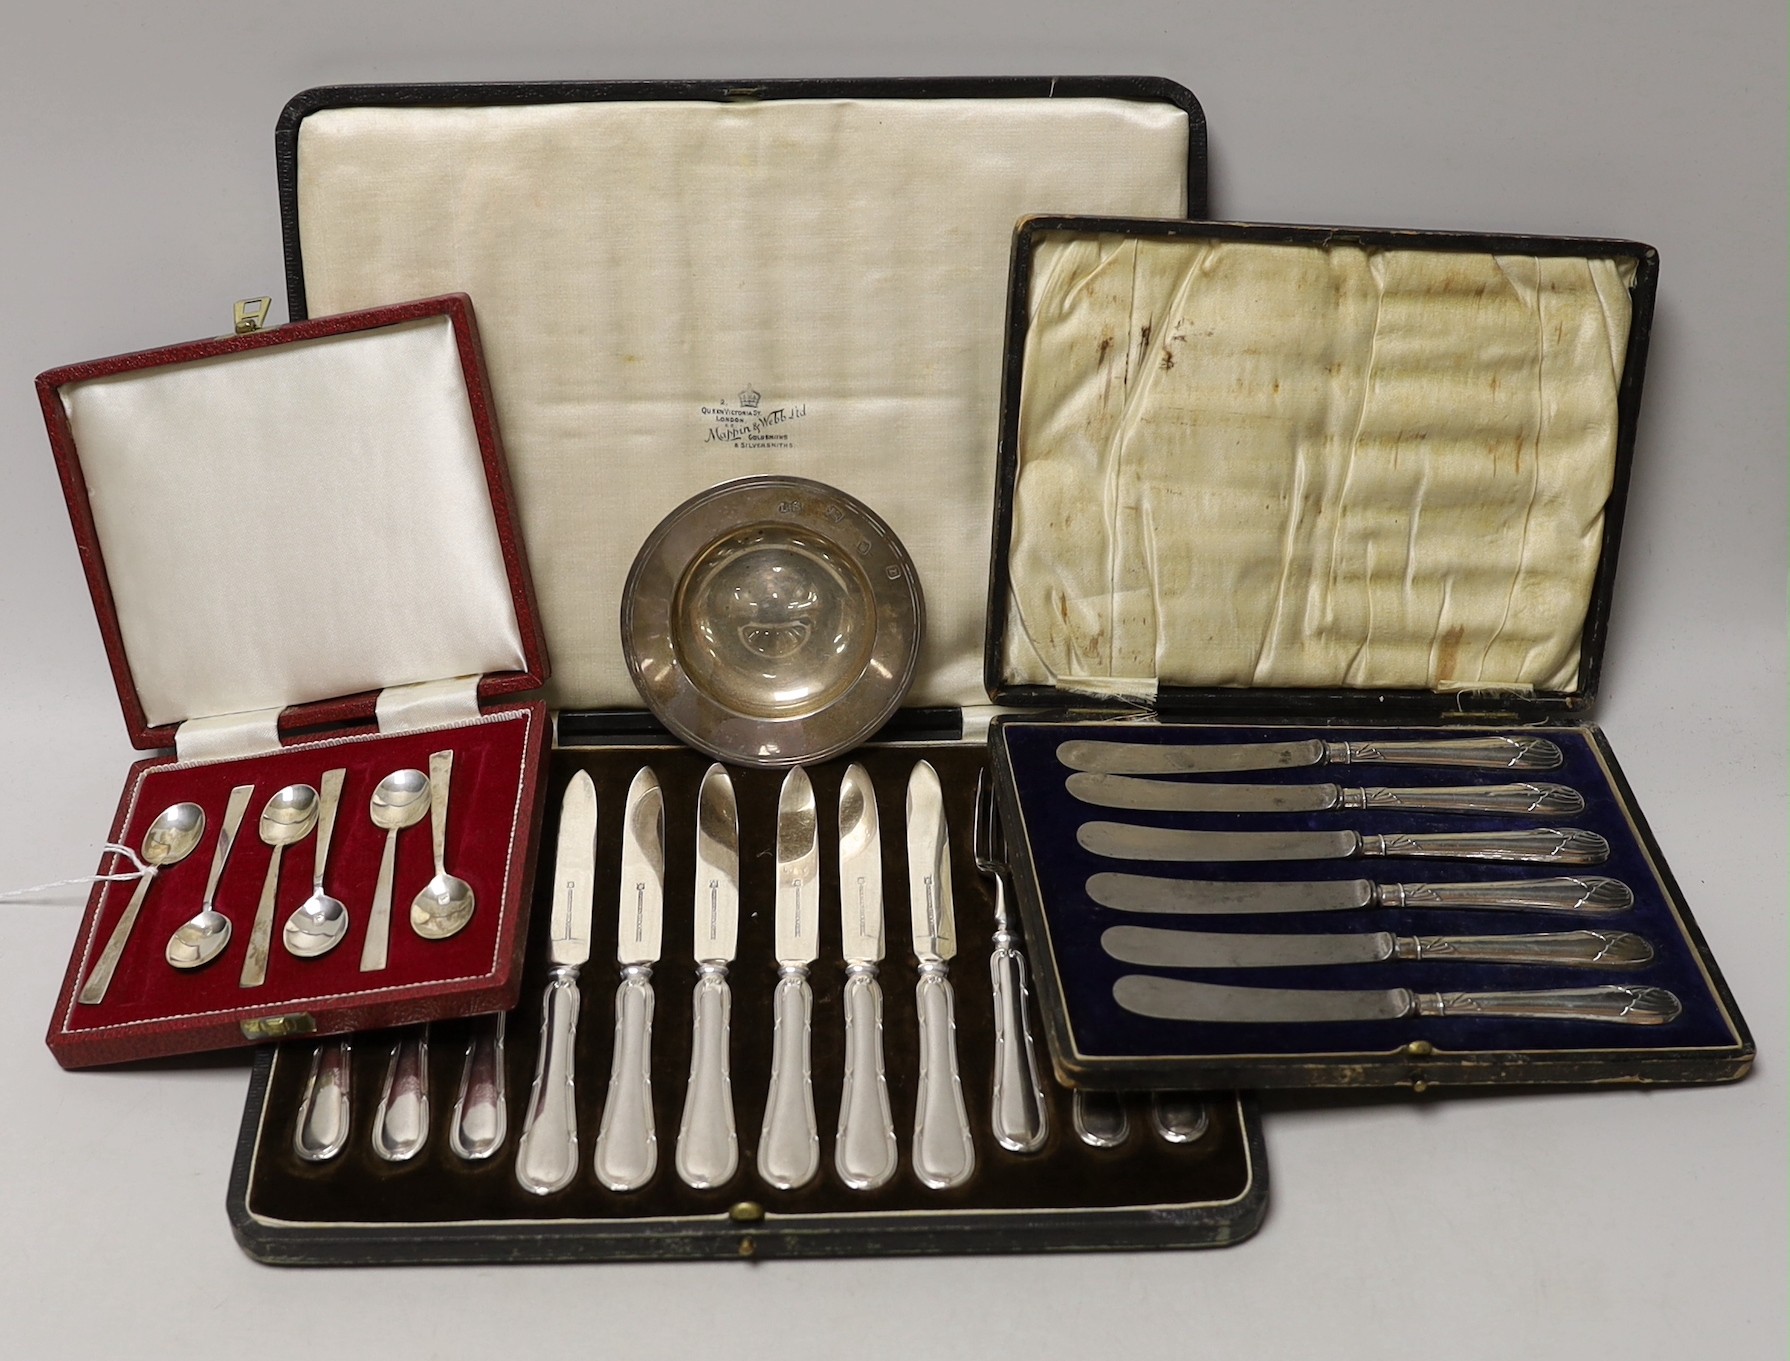 A cased set of six silver coffee spoons, a cased set of six silver-handled dessert knives, a small silver dish and a cased set of plated dessert knives and forks                                                           